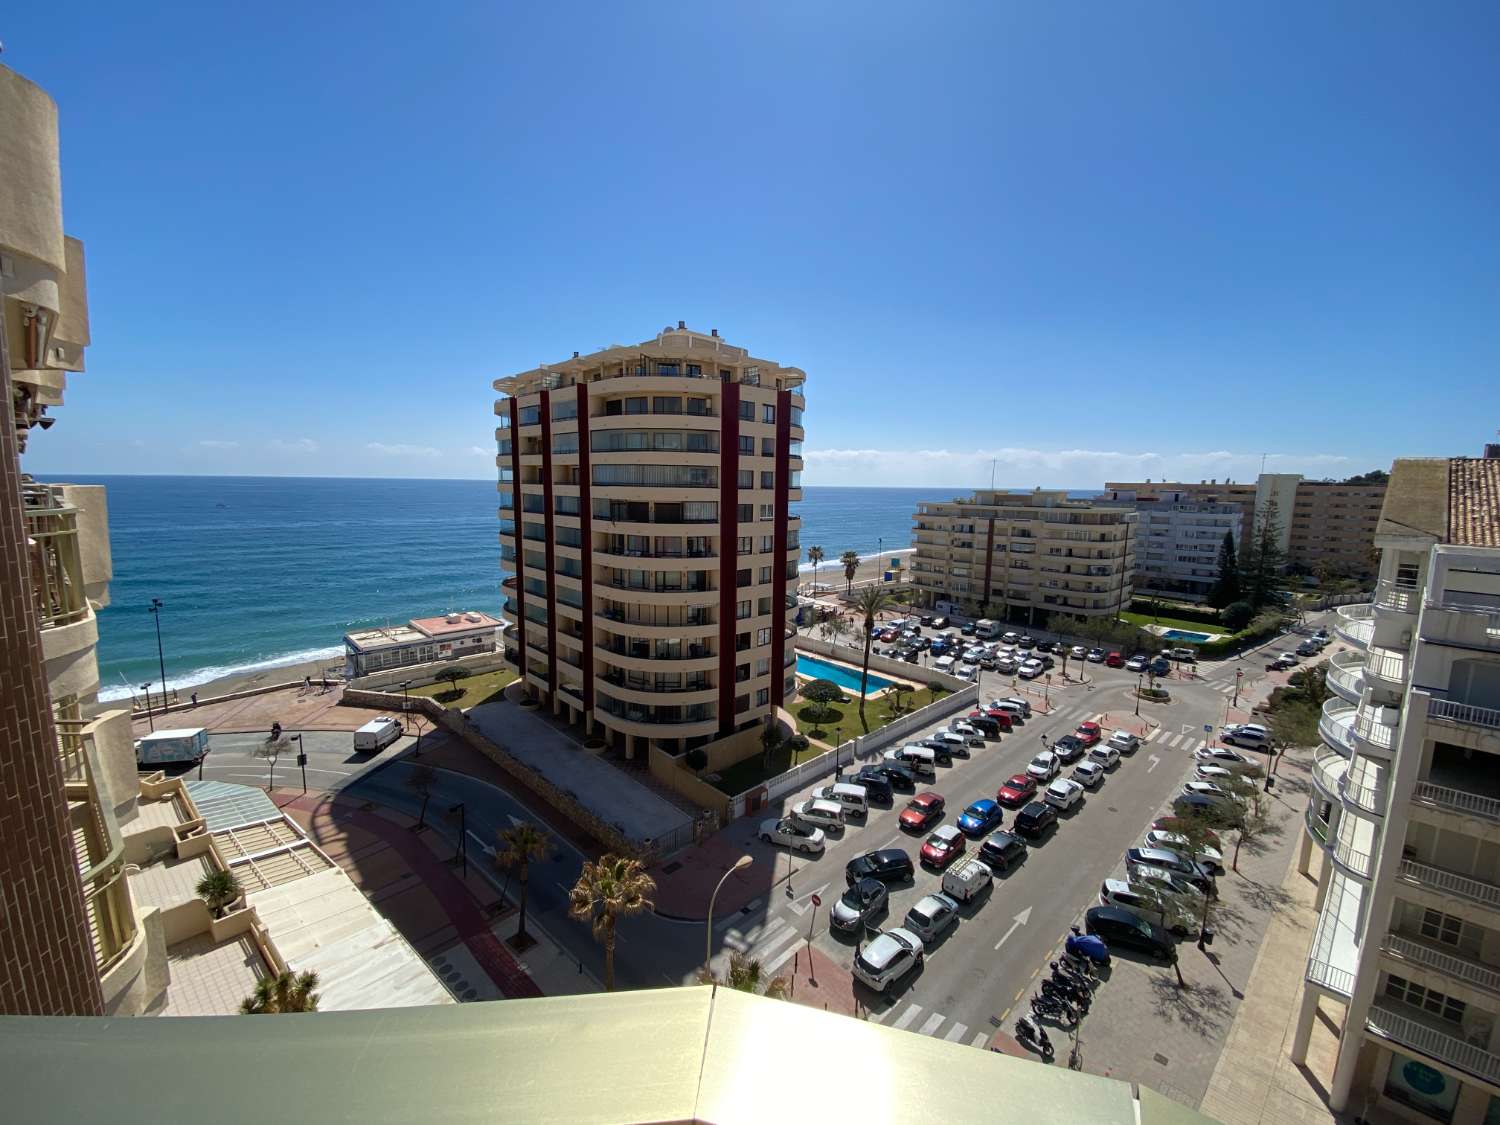 Views of the sea, beach, smell of the sea, in front of the Paseo Marítimo de Fuengirola